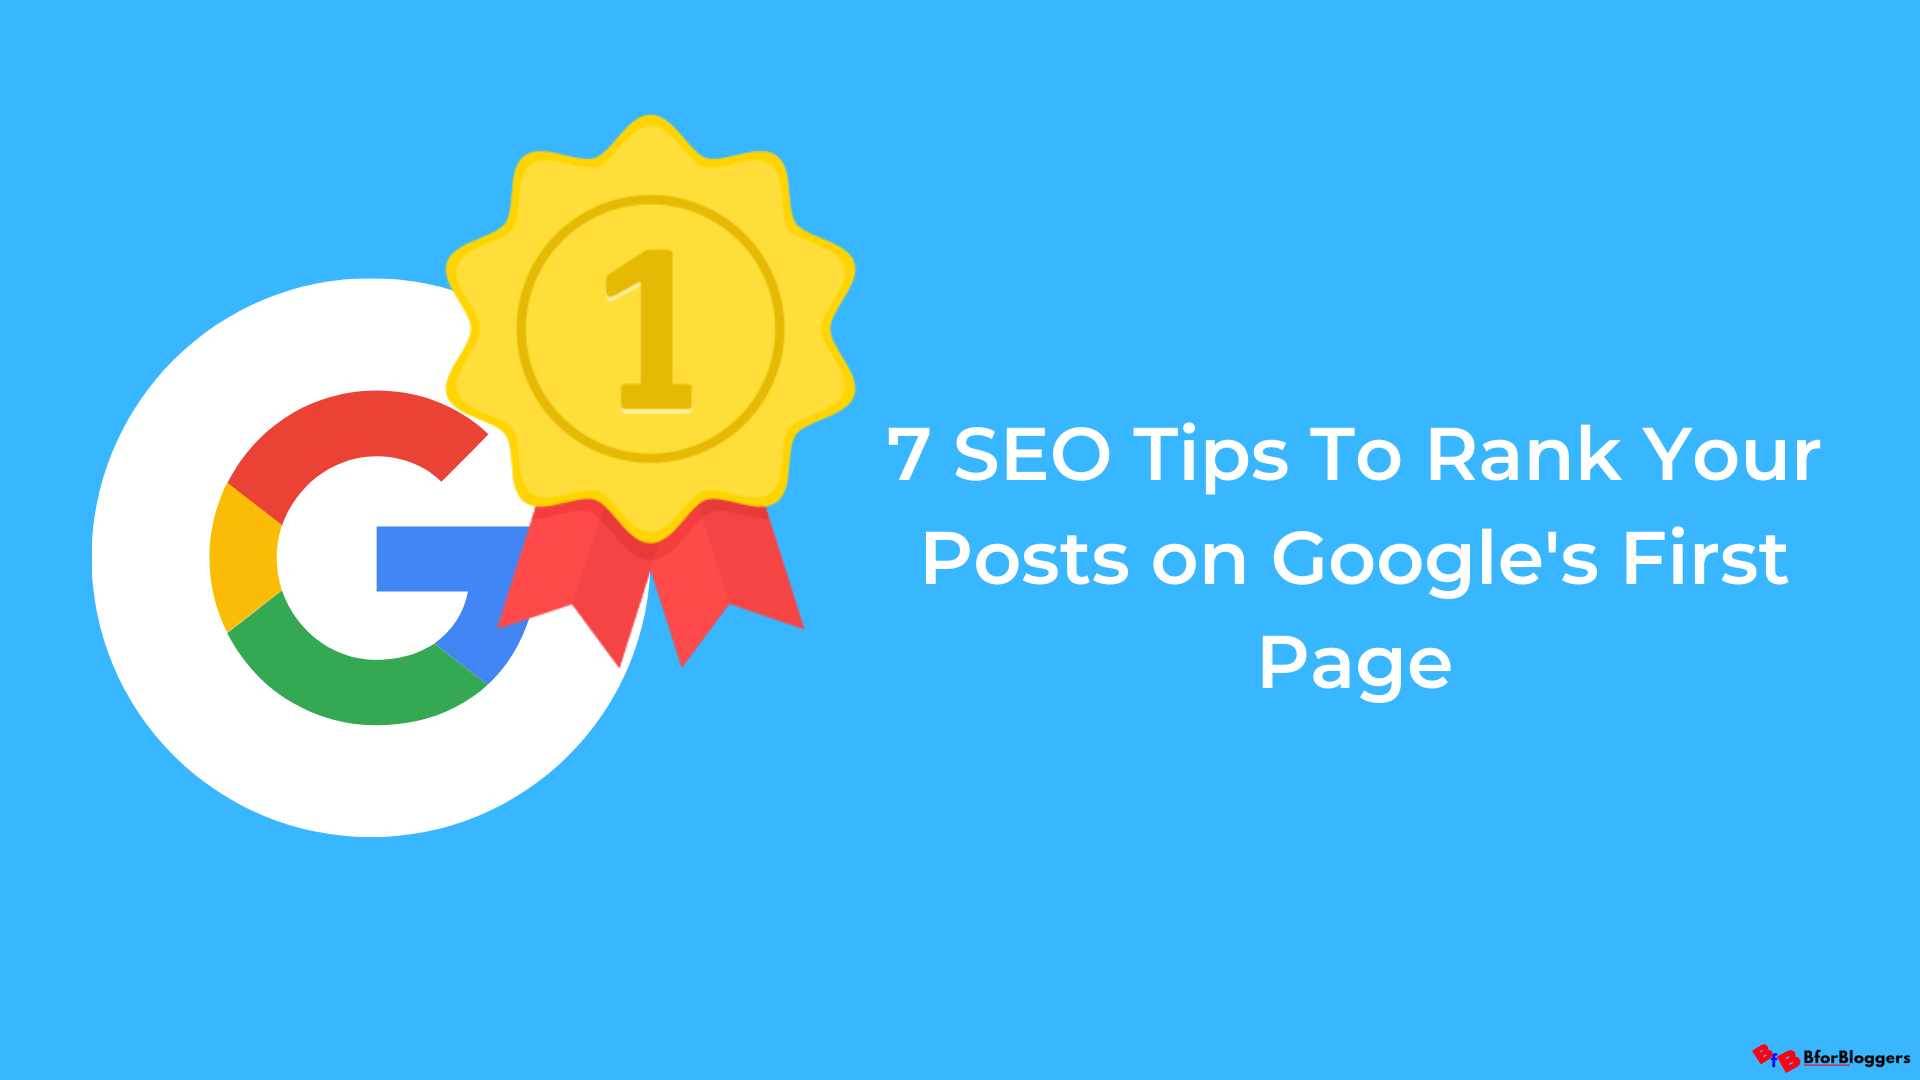 7 SEO Tips to Increase Rank of Blog Posts On Google SERPs